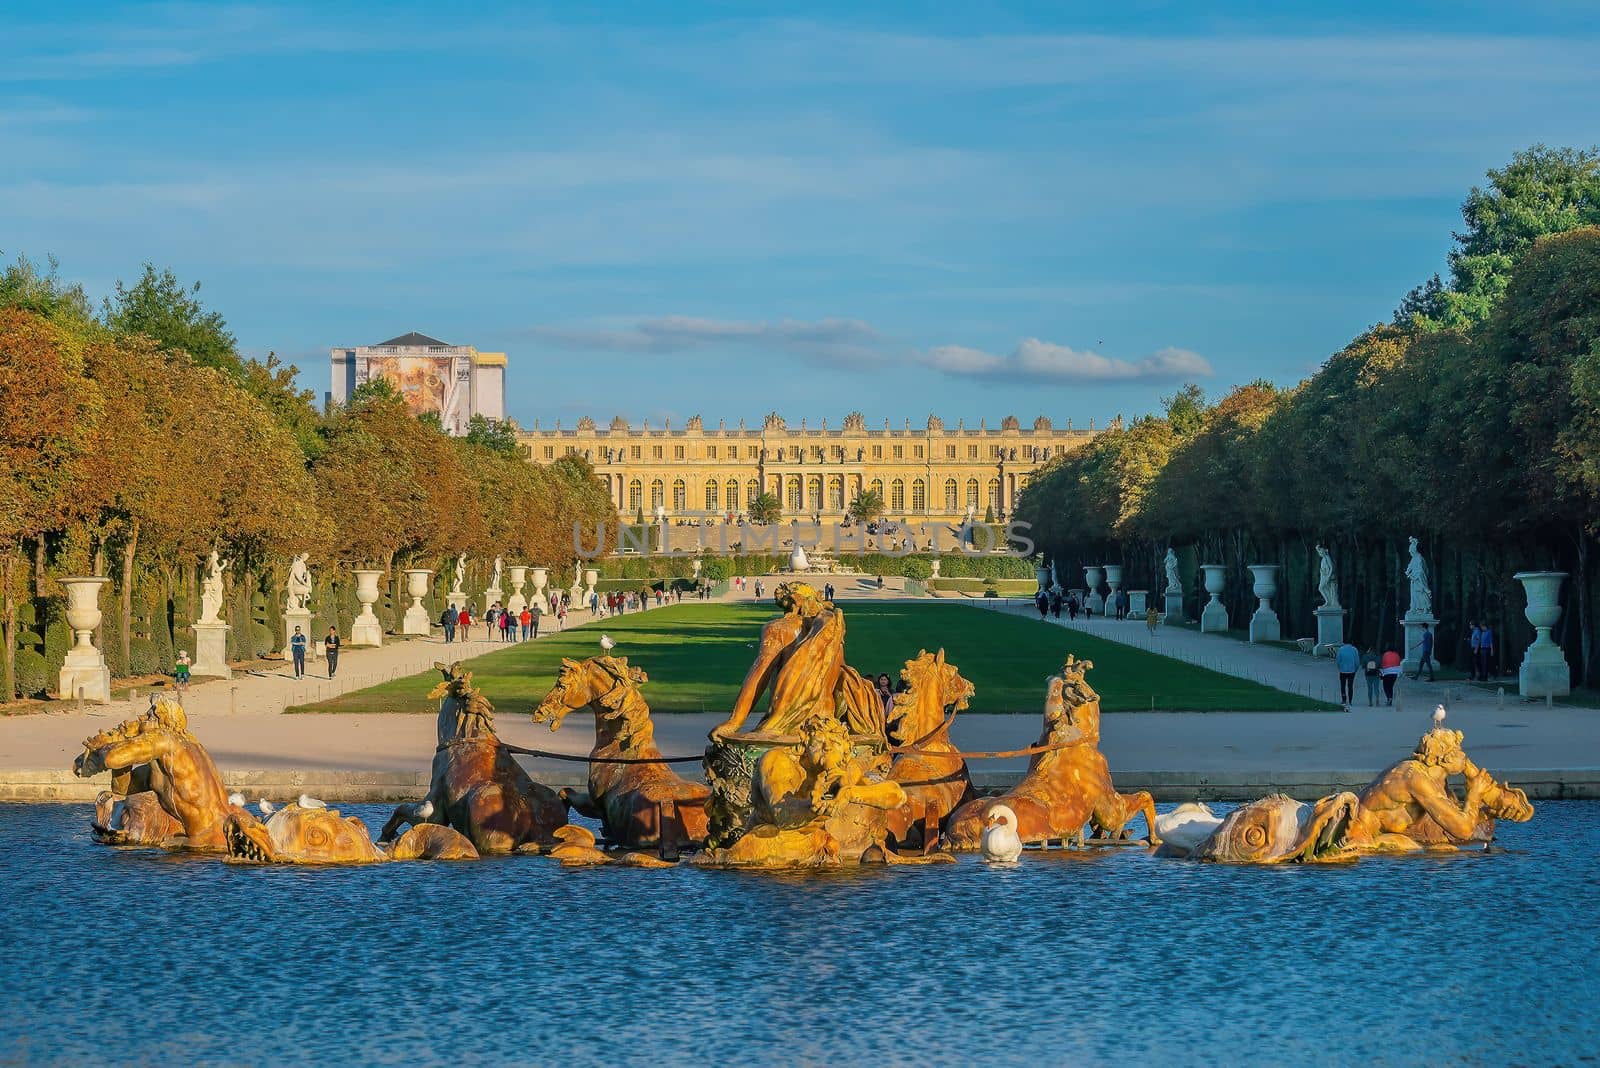 Garden of Chateau de Versailles and Apollo's fountain, near Paris in France at sunset